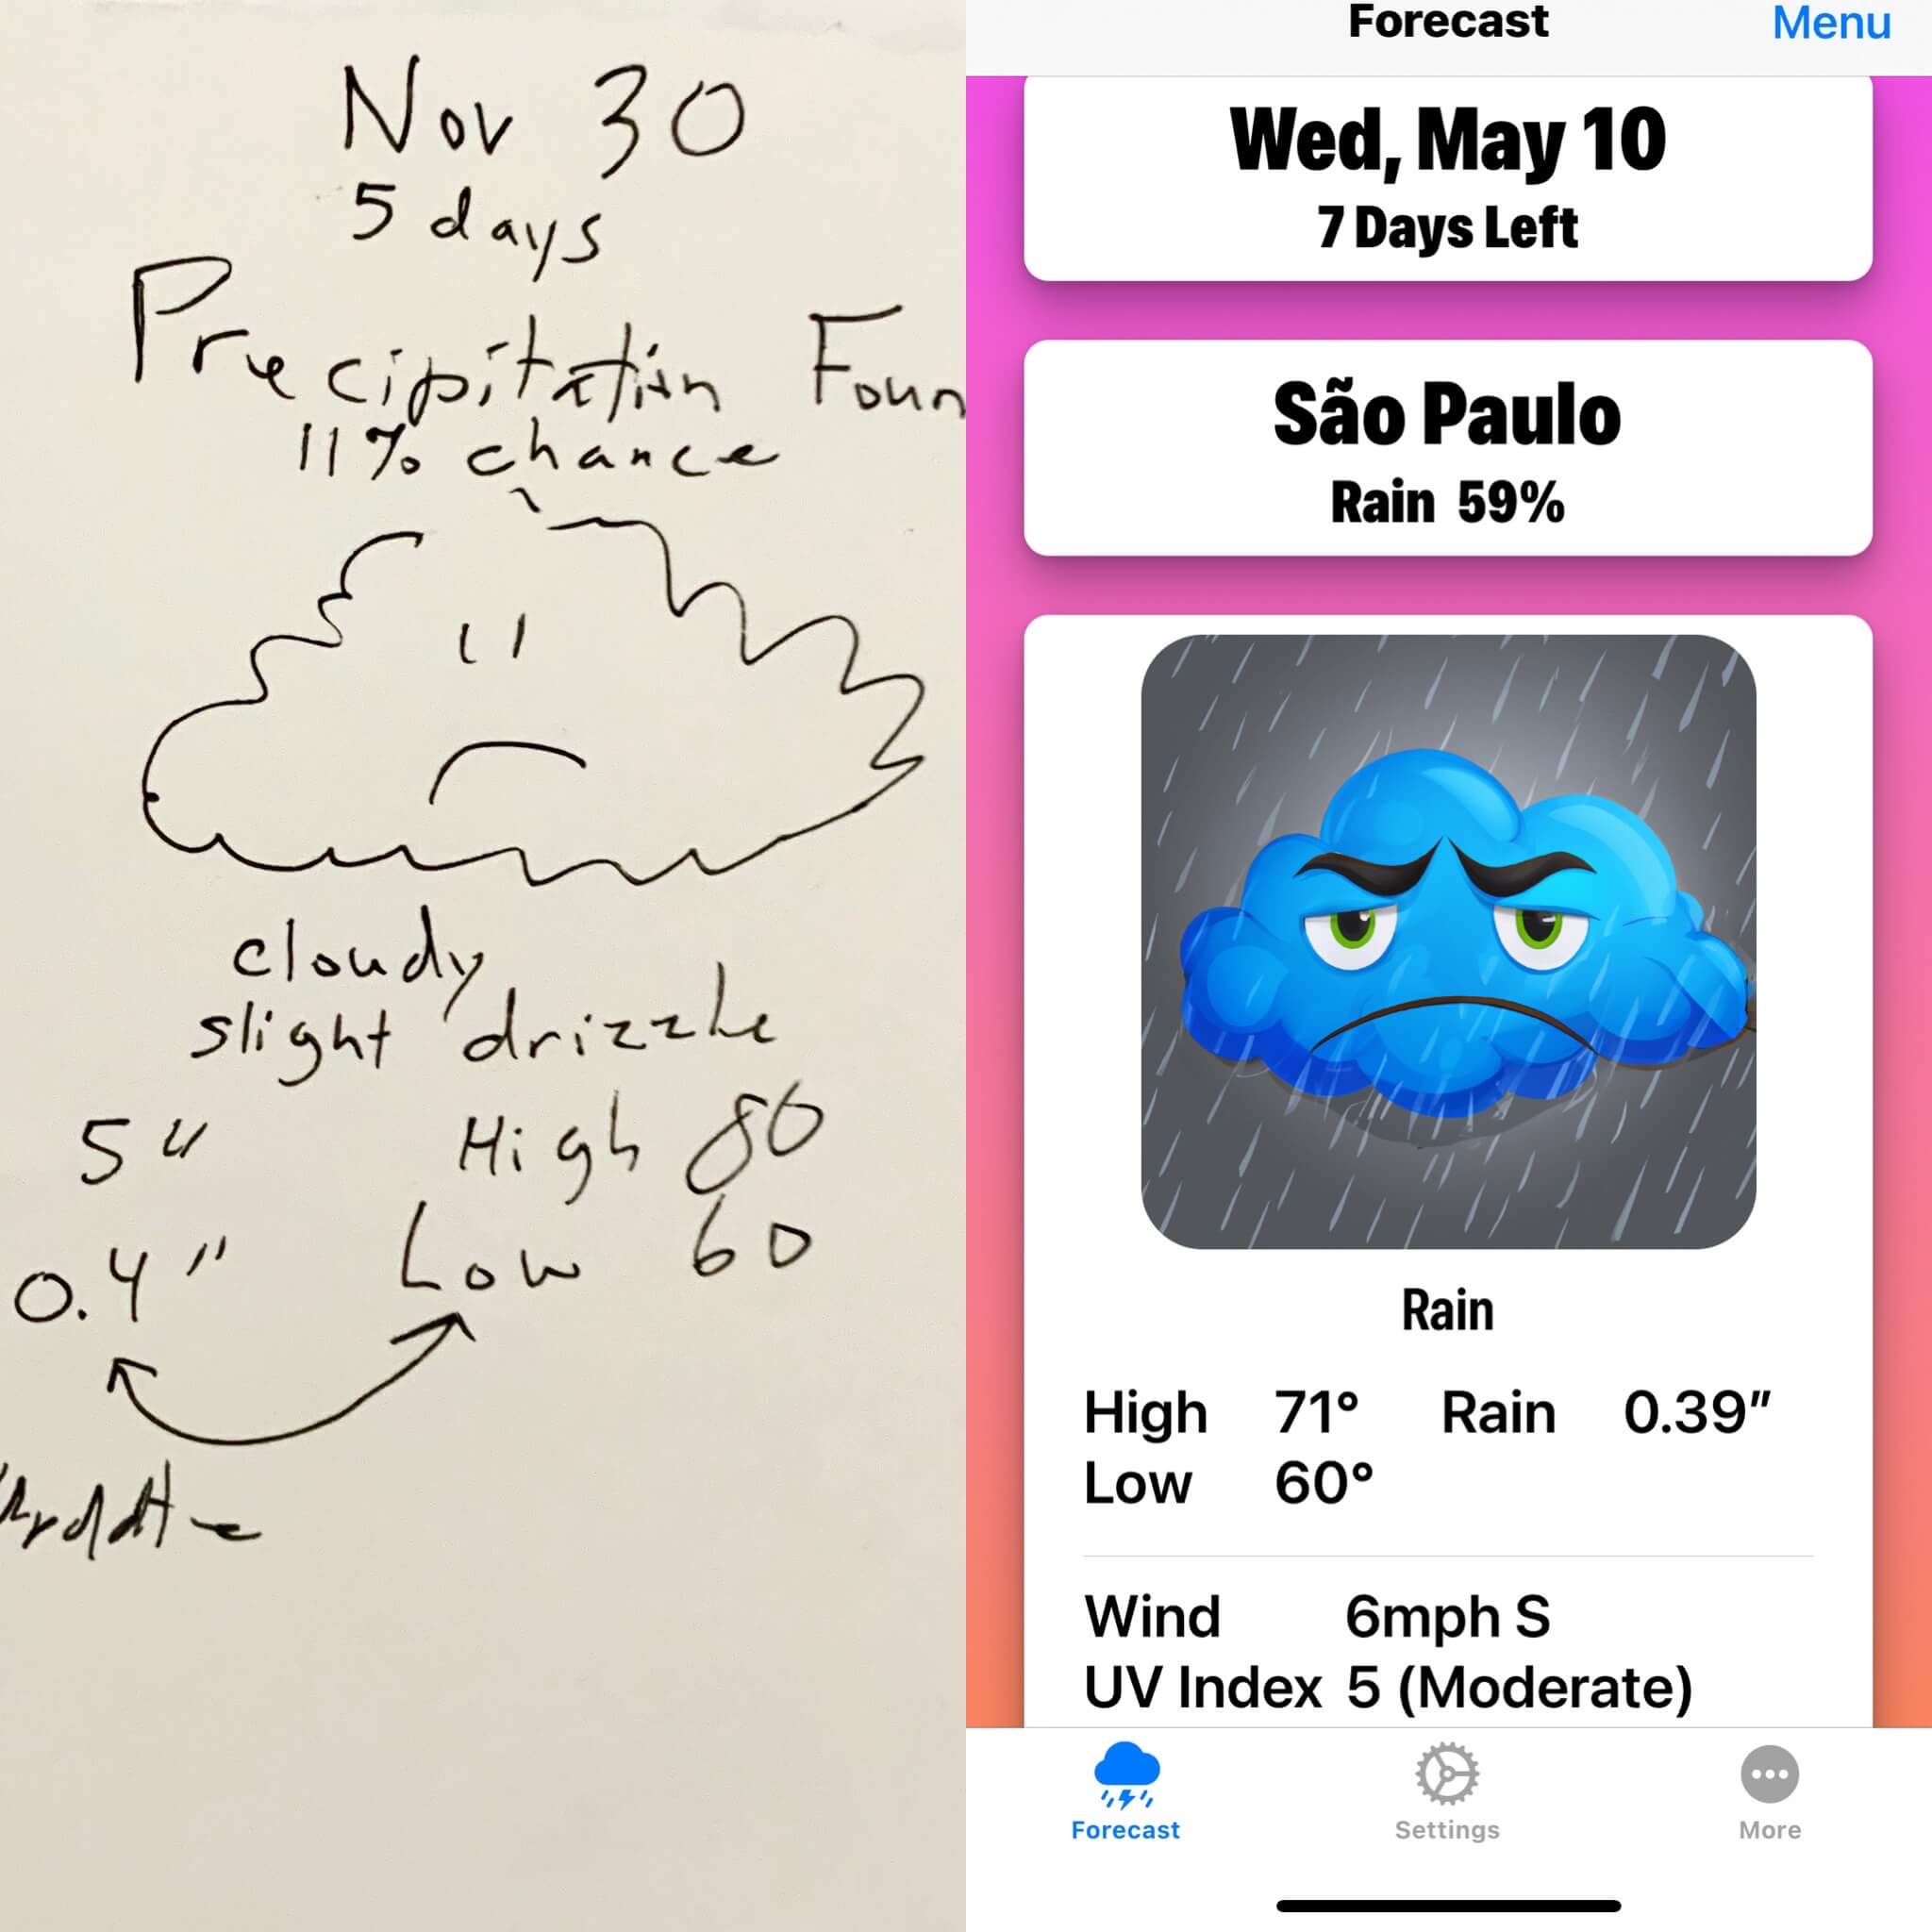 A rough sketch of what the app would look like. A sad cloud sits between the location and weather data.